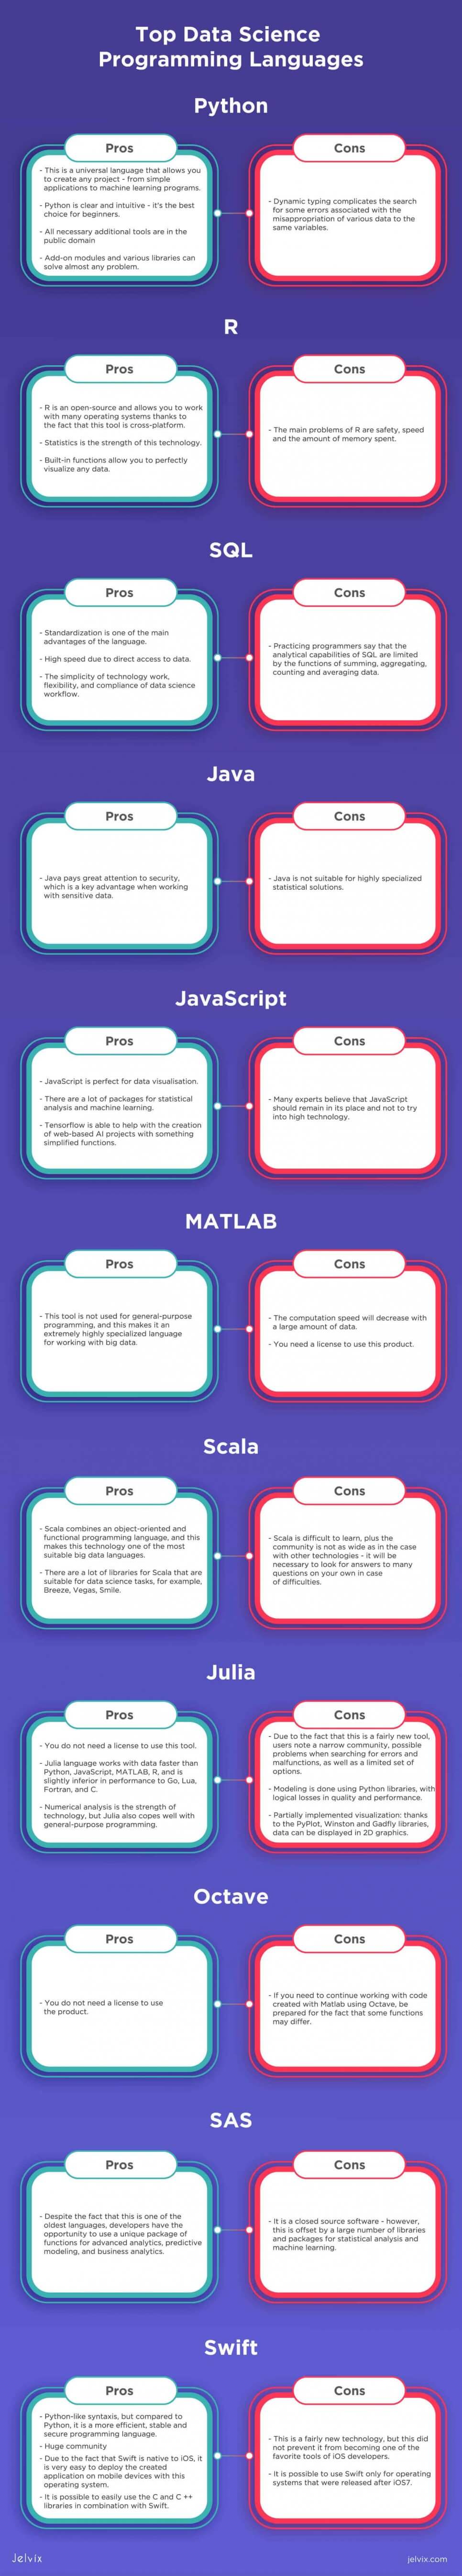 data science languages infographic